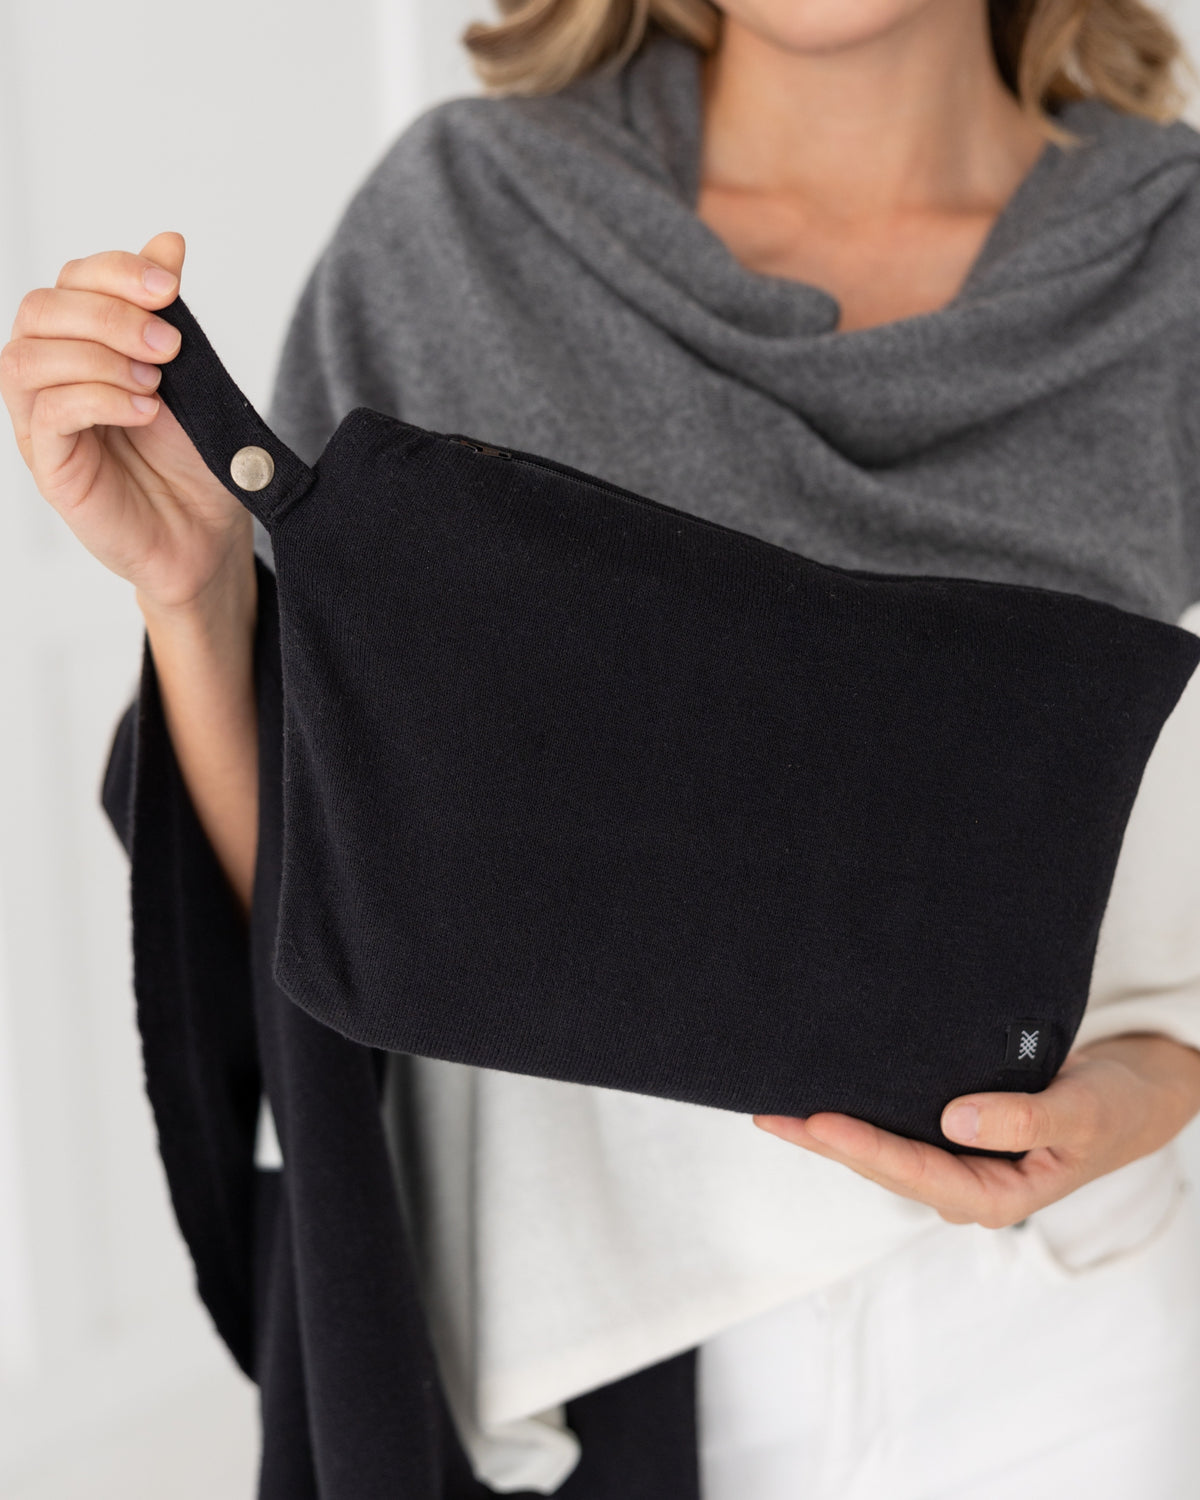 The Dreamsoft Travel Scarf Carry Pouch - Black